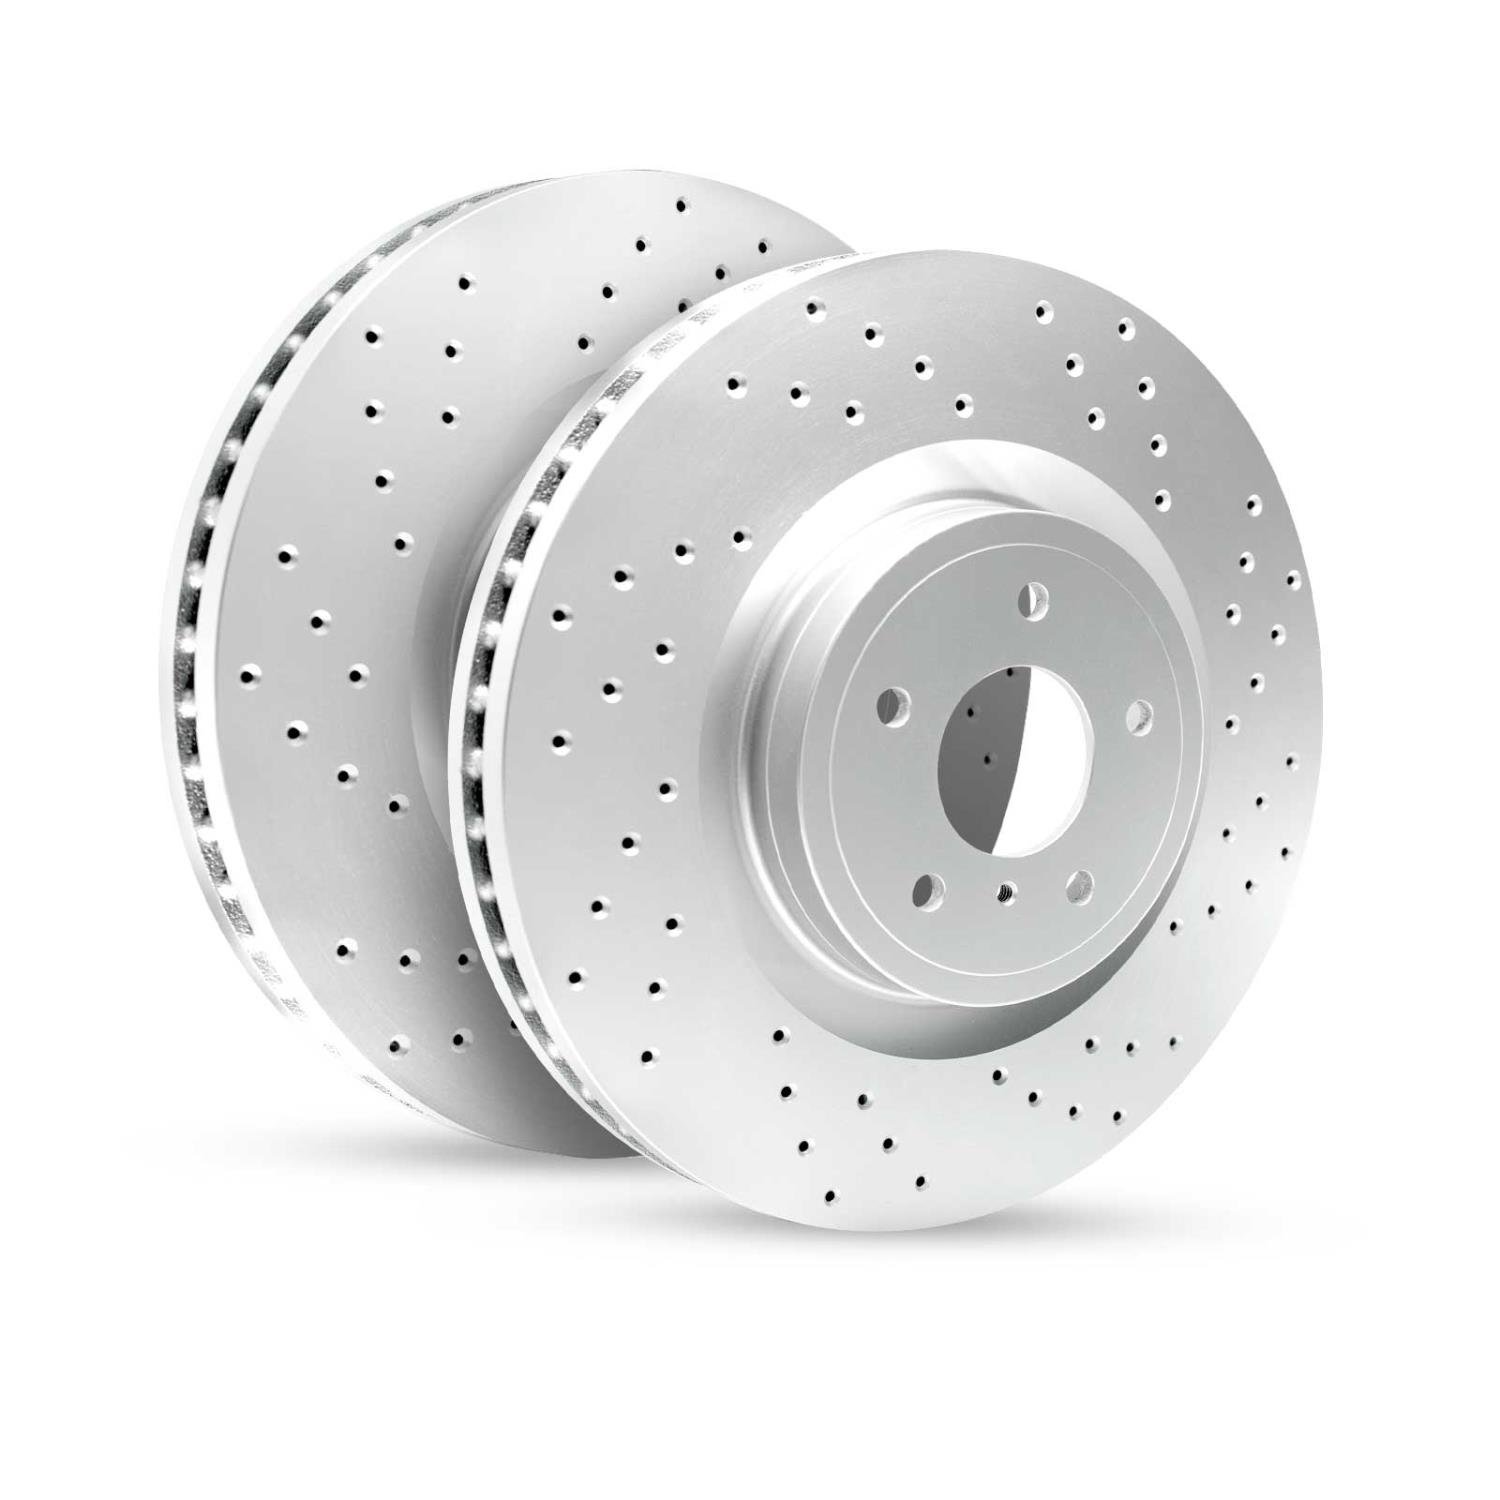 GEO-Carbon Drilled/Slotted Rotors, 2014-2016 Acura/Honda,